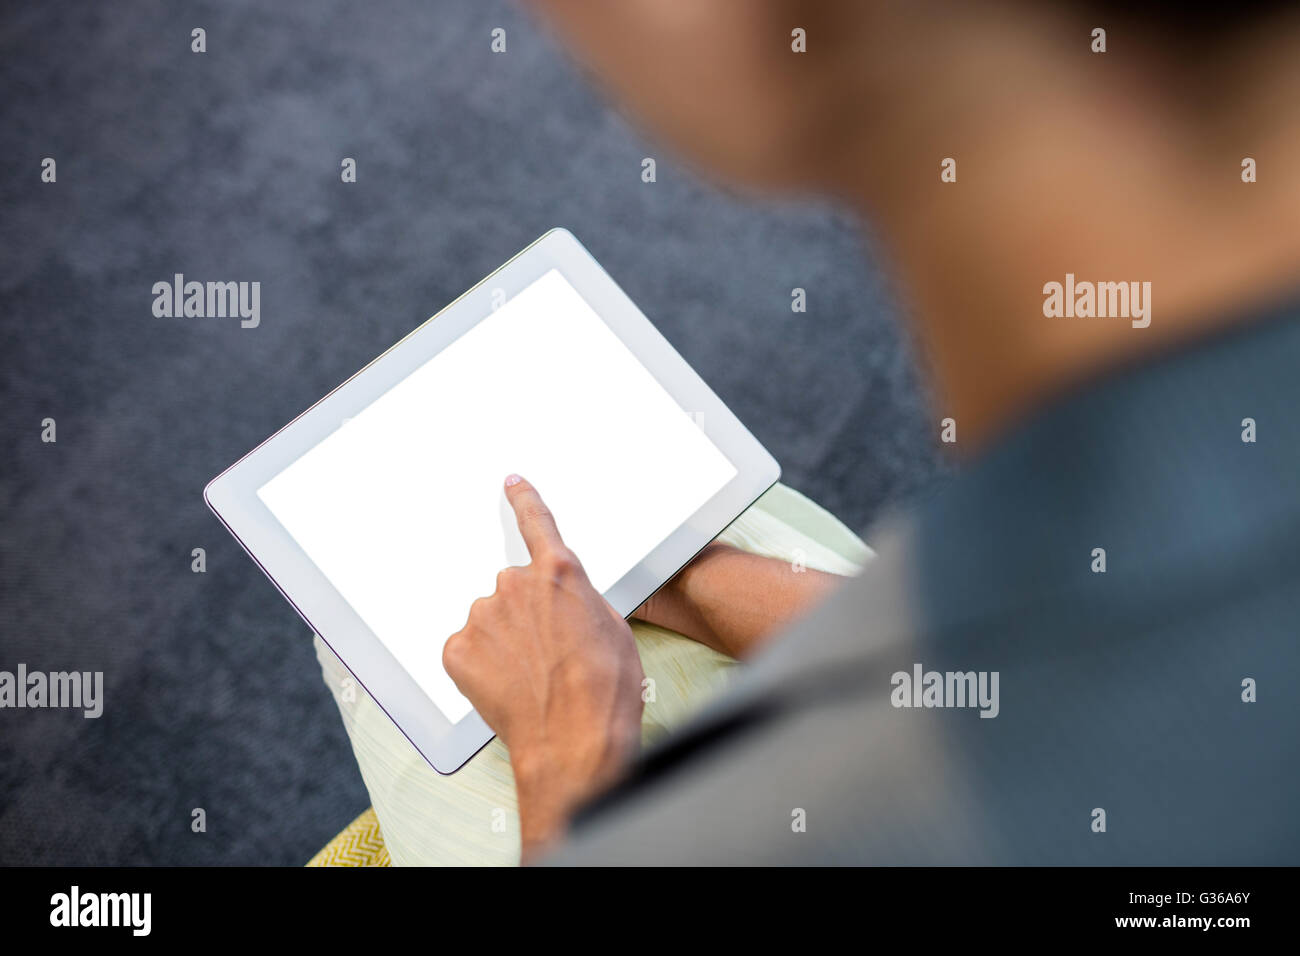 Focus on background of hand using a tablet Stock Photo